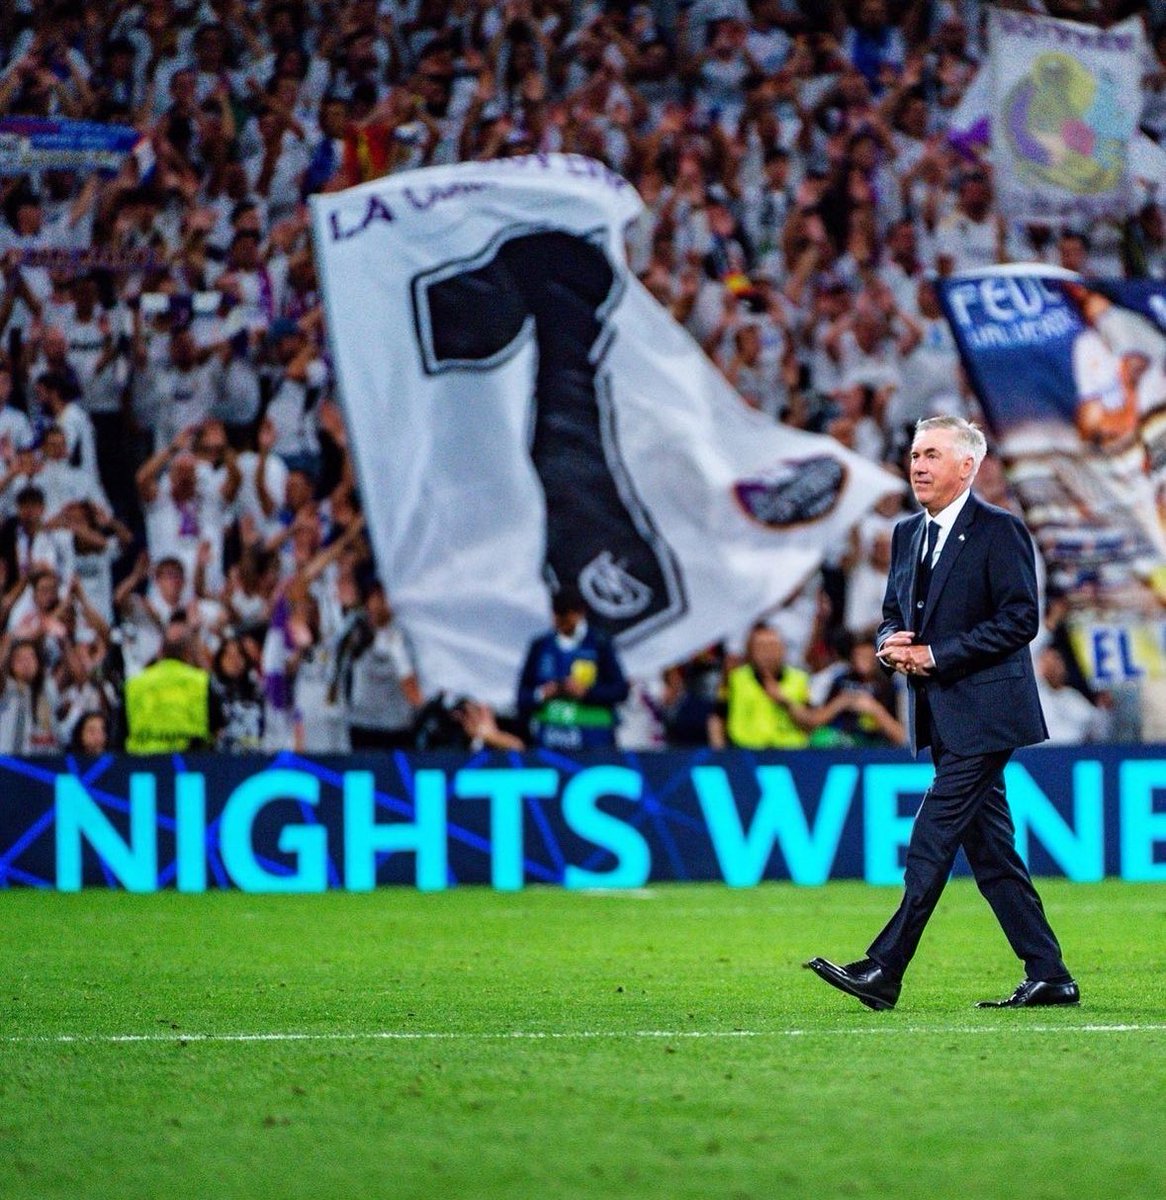 Super cup winners. Top of La Liga. Champions League semis. 2 games lost all season. All this with 36 injuries and losing the two starting CBs and GK with ACL tears. Don Carlo Ancelotti everyone.